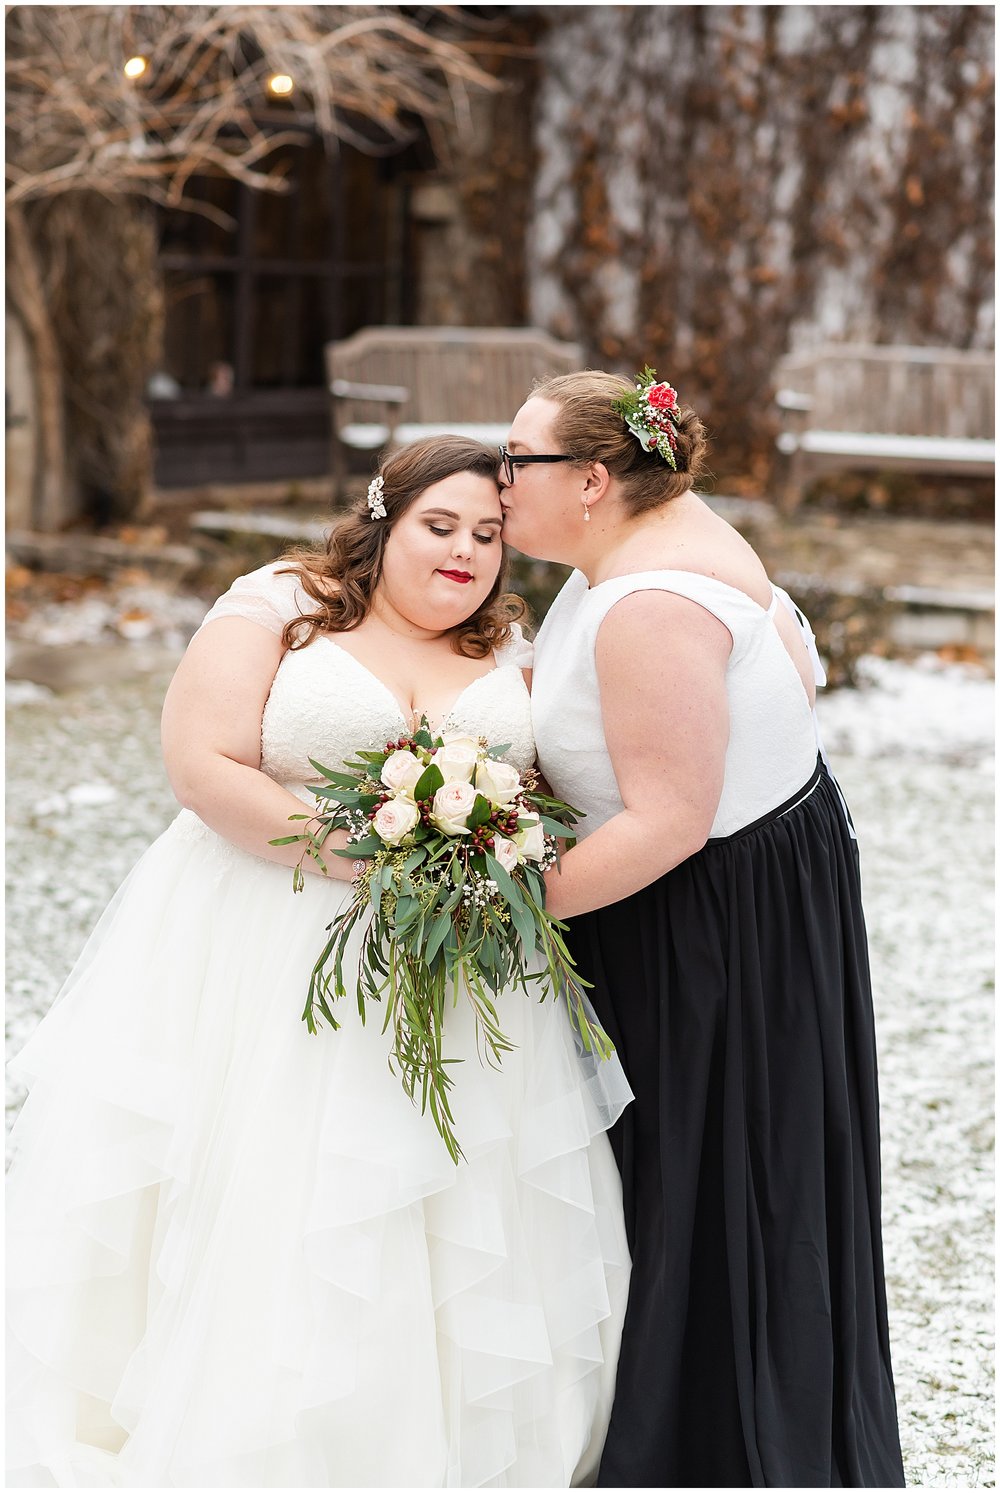 Horticultural Hall Wedding Photo